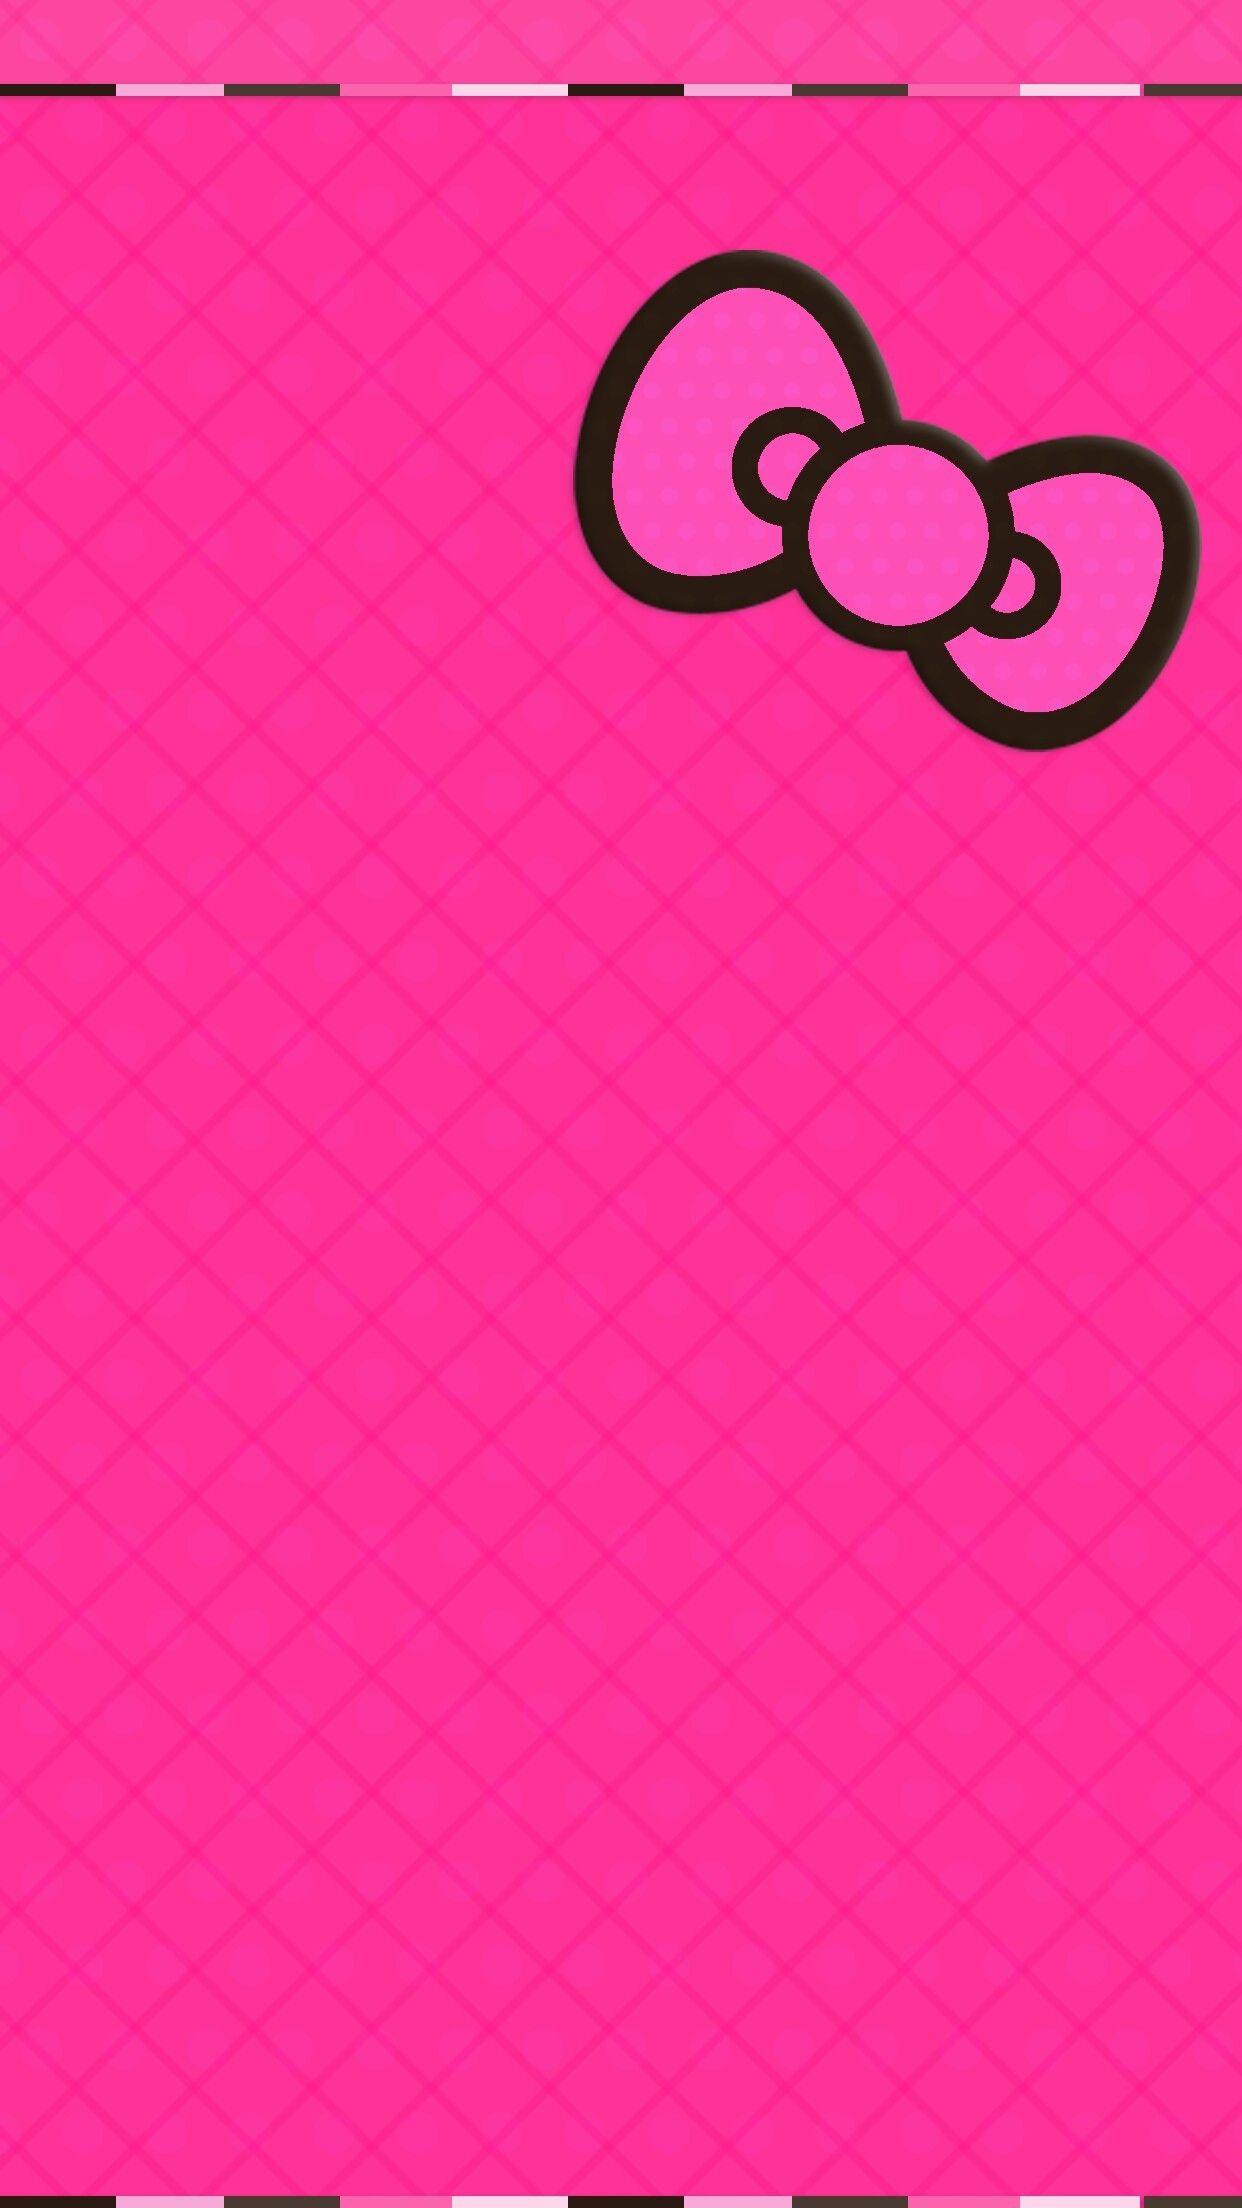 21 Cute Hello Kitty Wallpaper Ideas For Phones : I Love Hello Kitty - Idea  Wallpapers , iPhone Wallpapers,Color Schemes